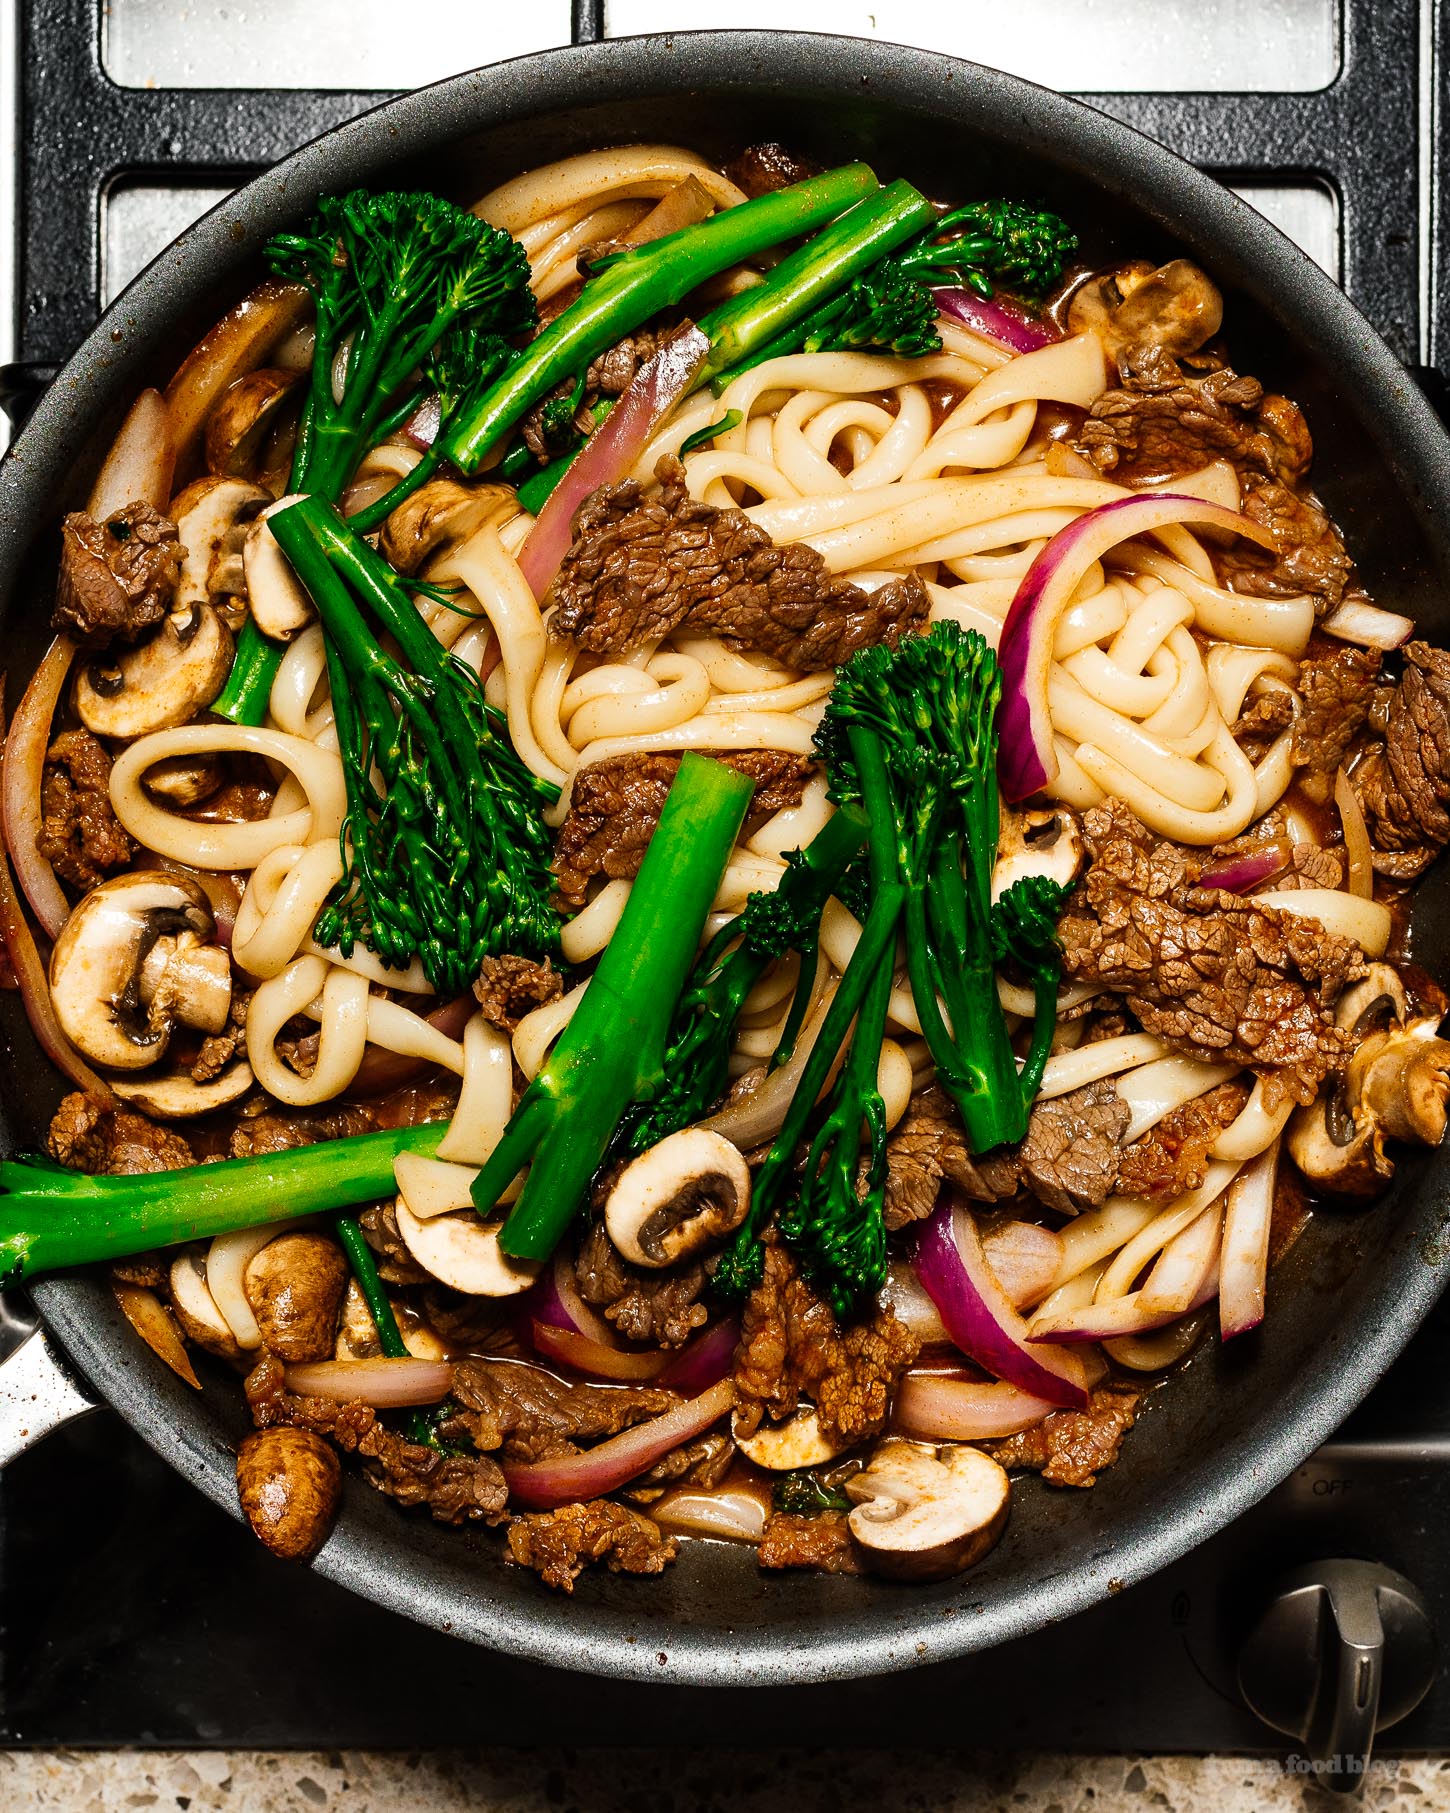 This is a weeknight stir fry udon based on japanese spicy beef that comes together easily and quickly in only 10 minutes. It's spicy, savory, and irresistably delicious. You'll never believe it only has 8 ingredients. #udon #weeknight #stirfry